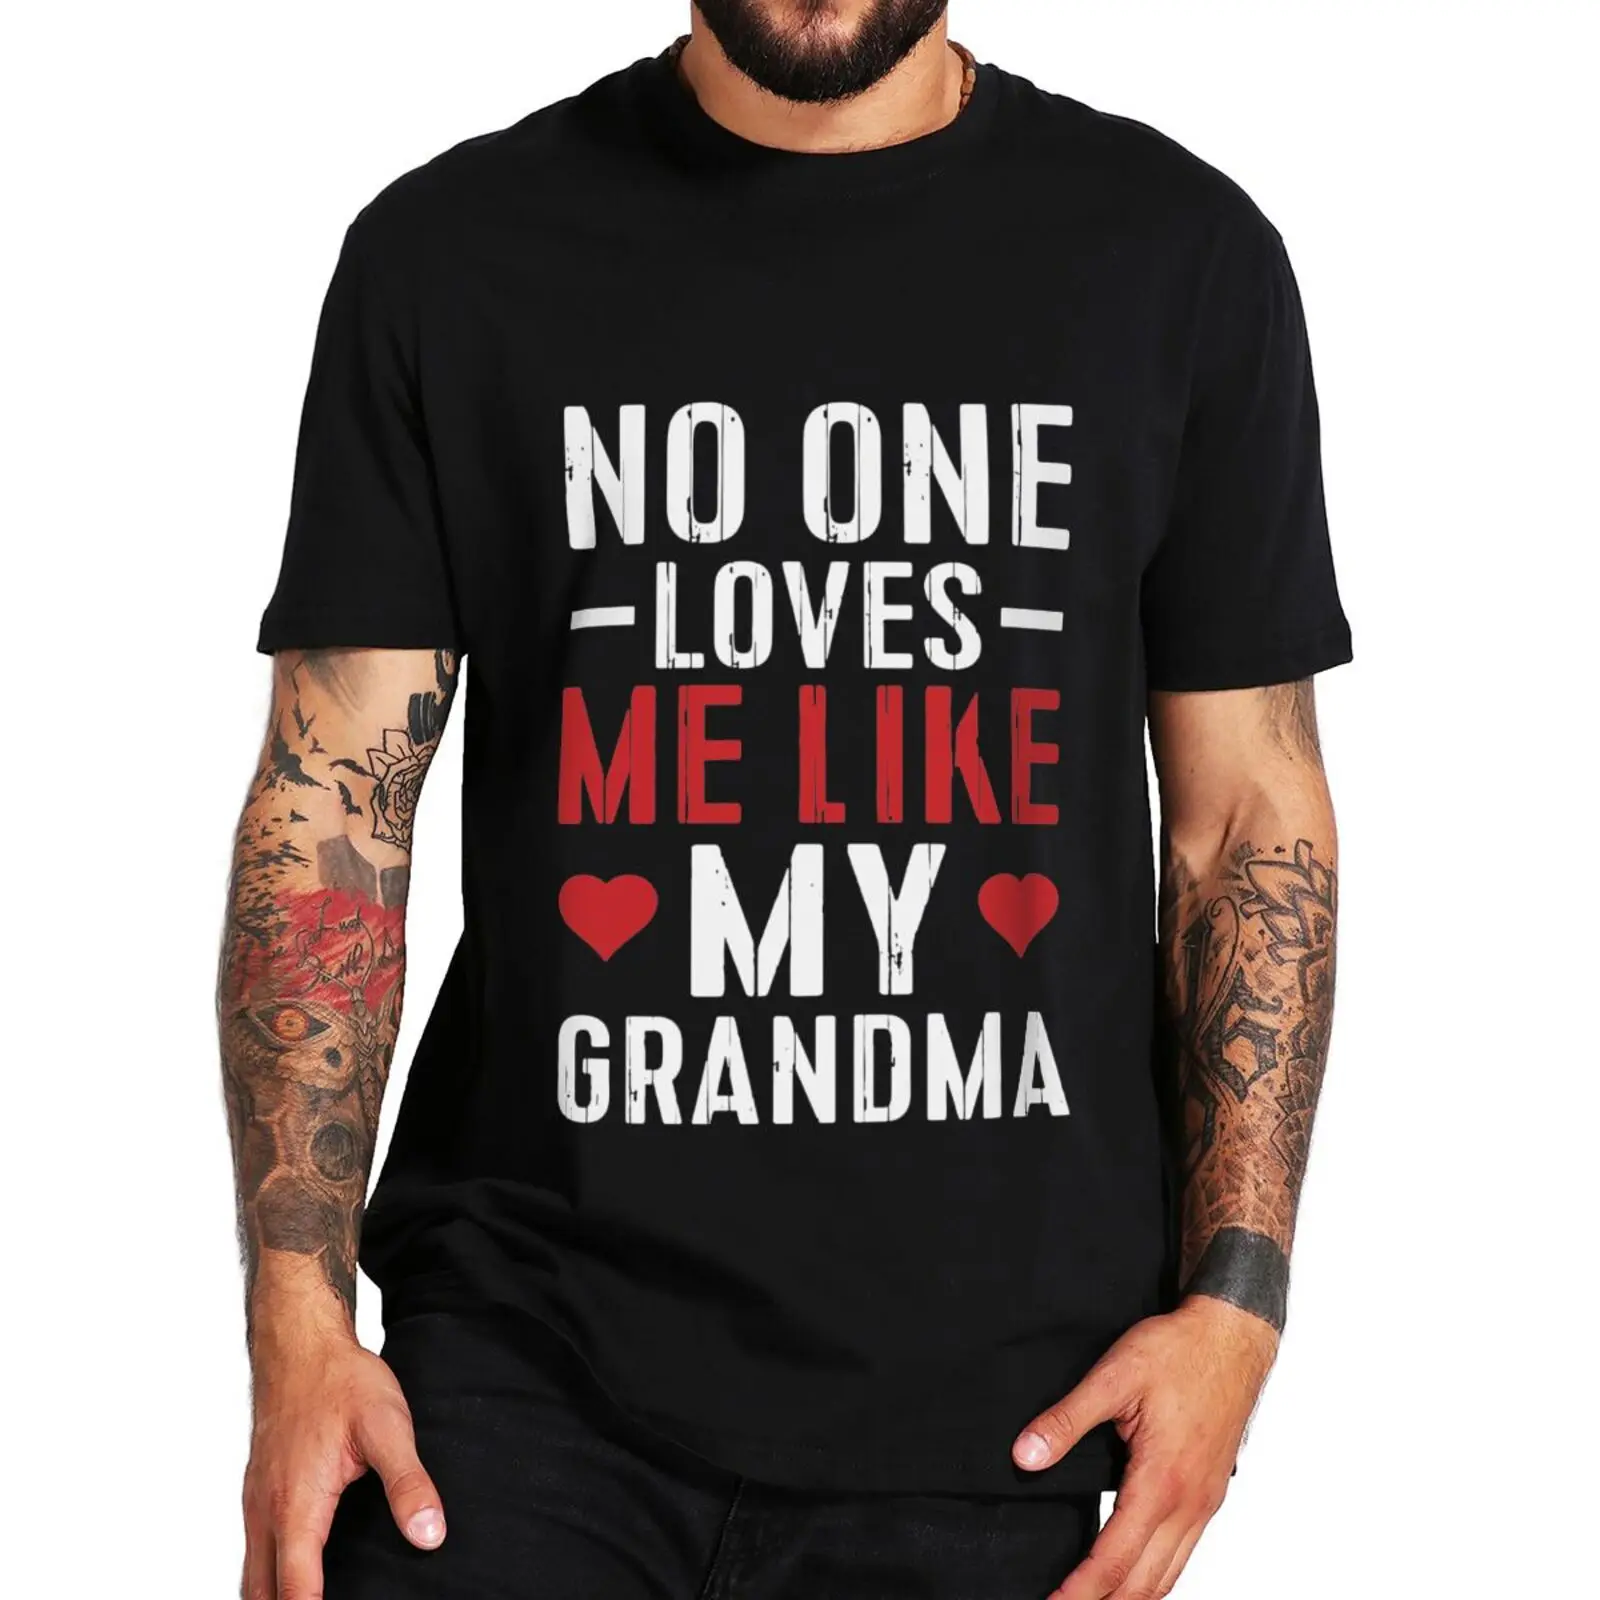 

No One Loves Me Like My Grandma T Shirt Vintage Humor Sayings Gift T-shirt For Men Women Oversized 100% Cotton Casual Tee Tops